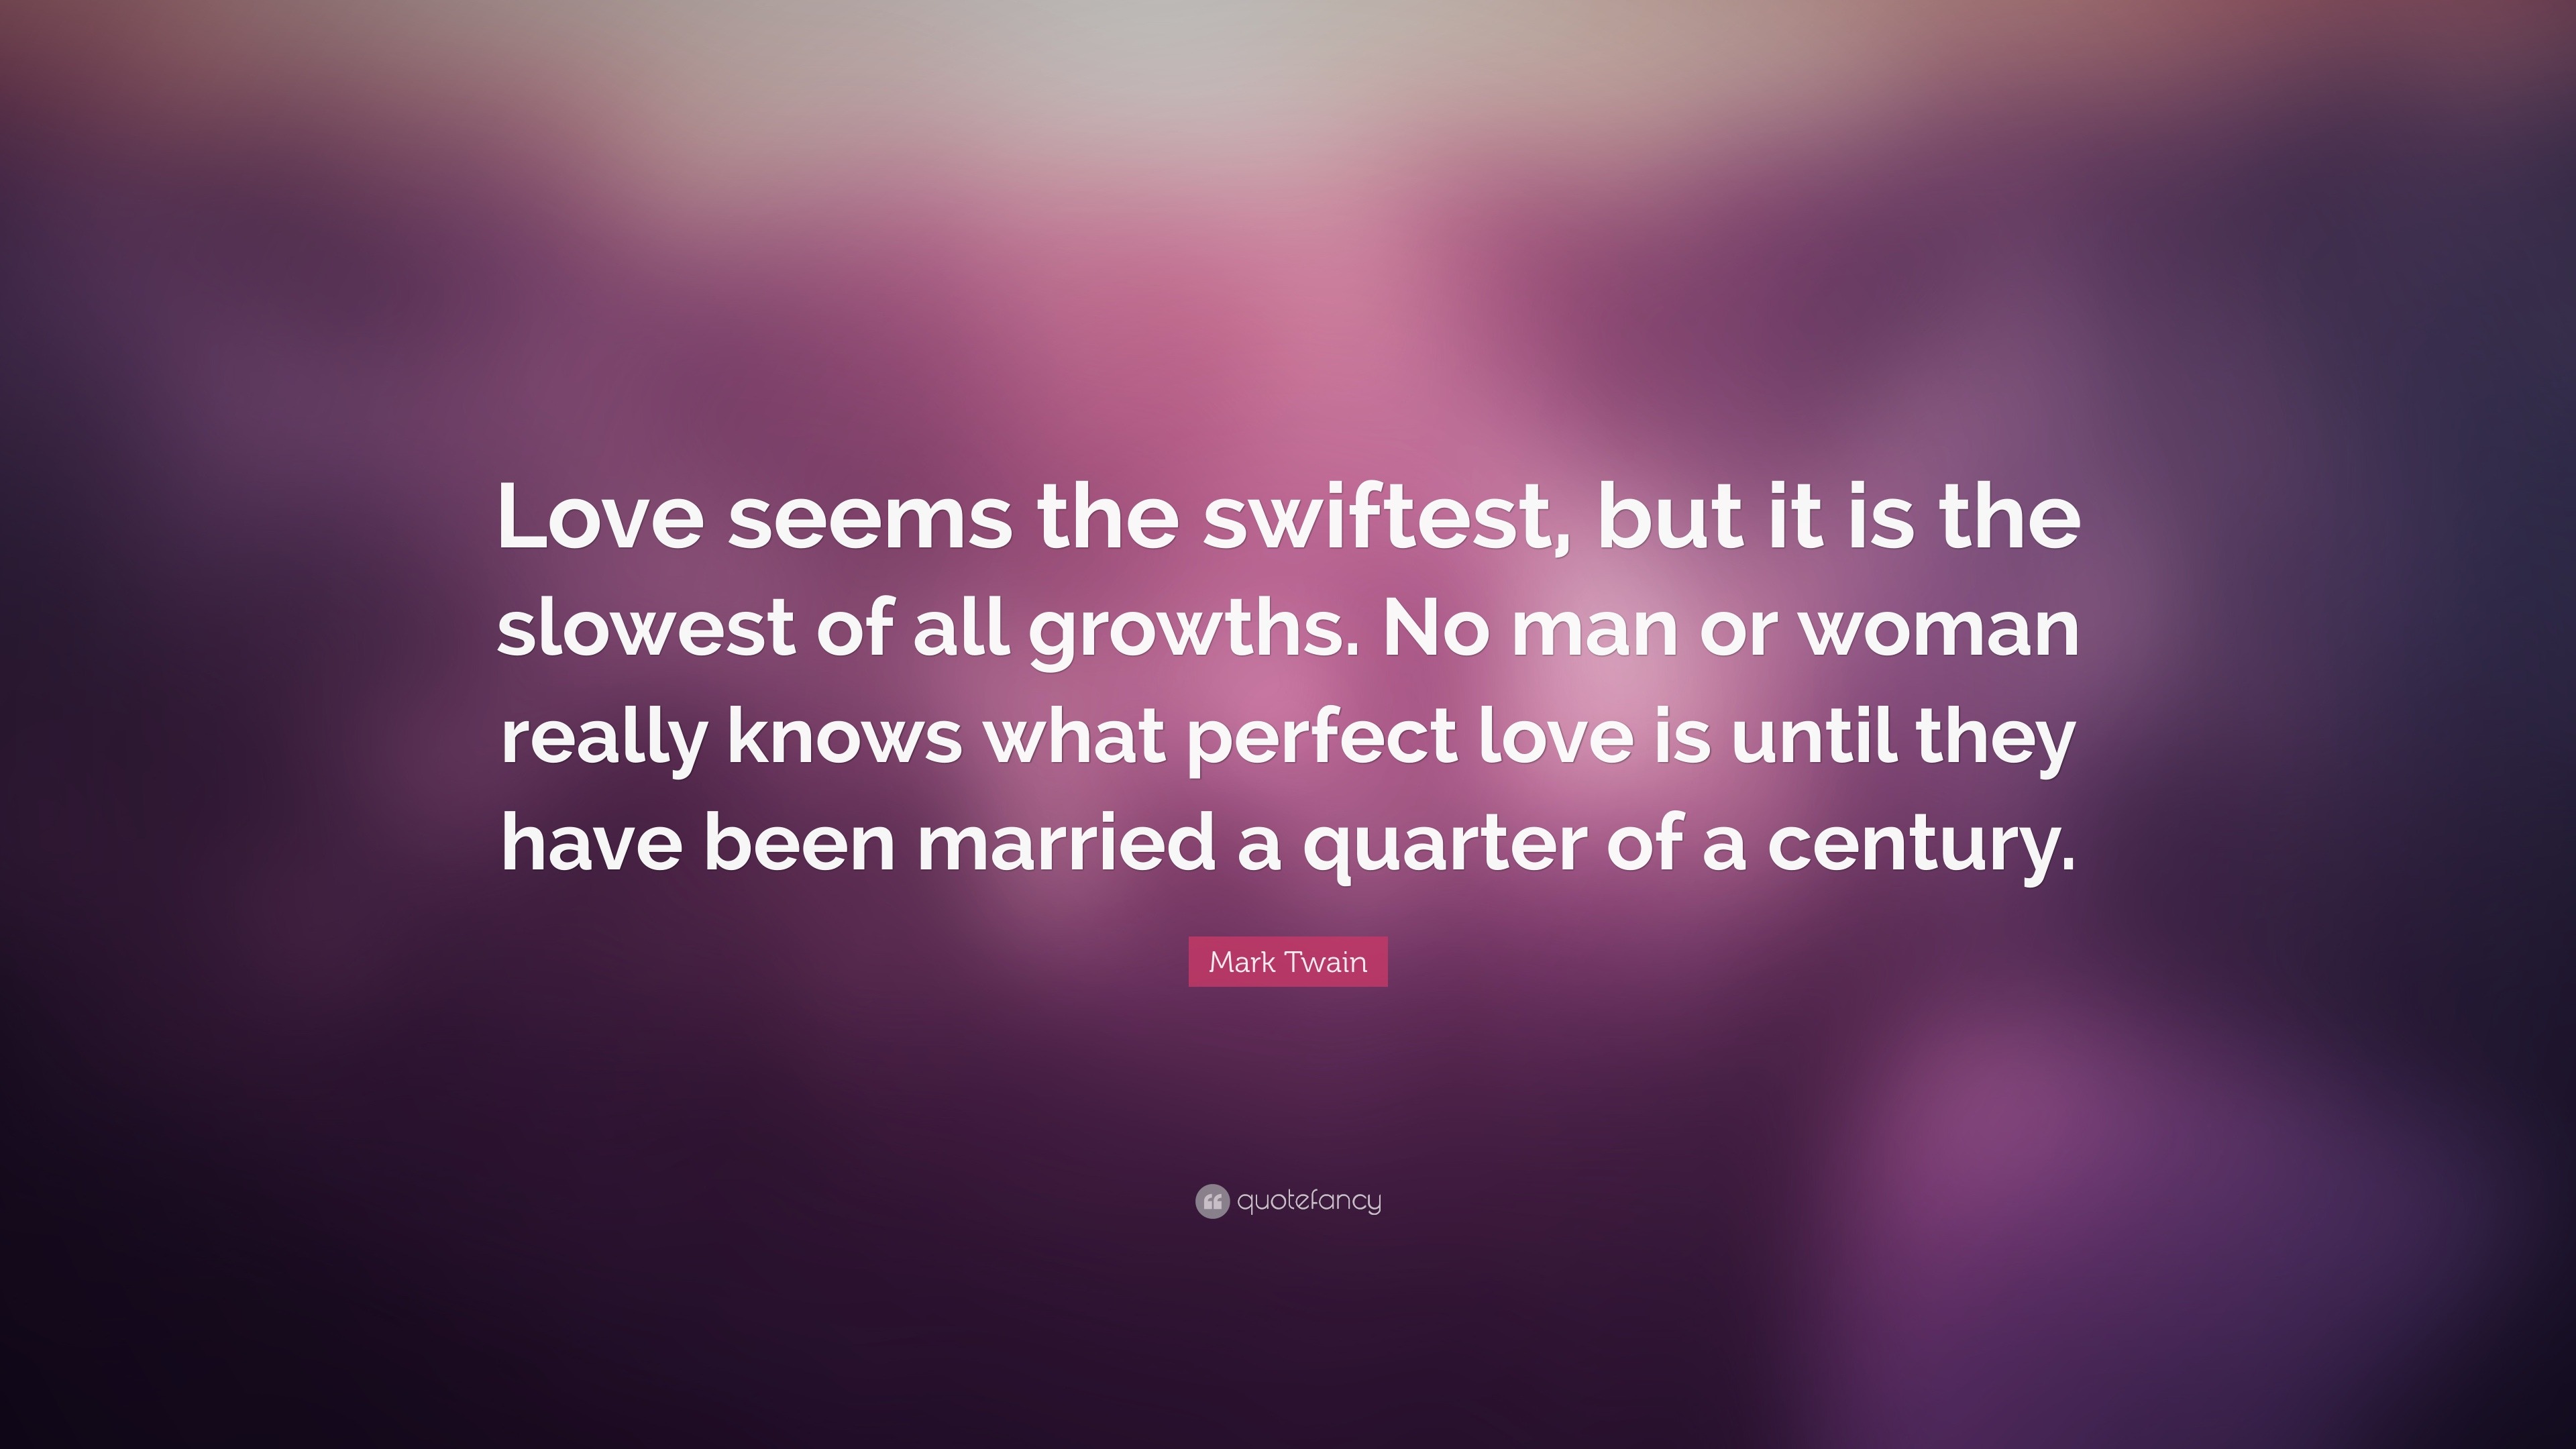 Mark Twain Quote “Love seems the swiftest but it is the slowest of